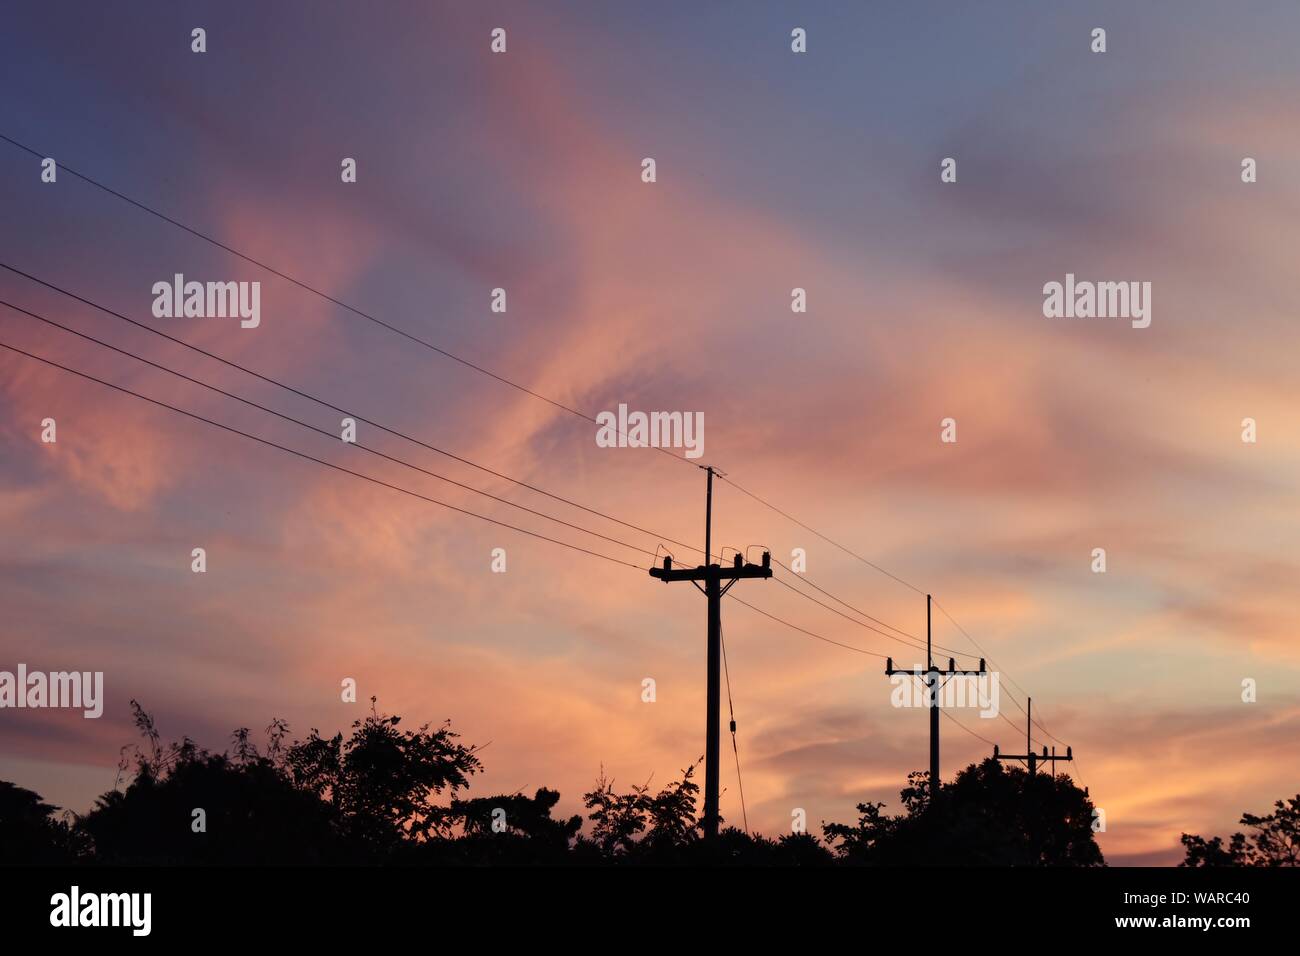 Silhouette  of electricity poles and tree at roadside with blue sky at sunset, Horizon began to turn orange with purple and pink cloud at night Stock Photo